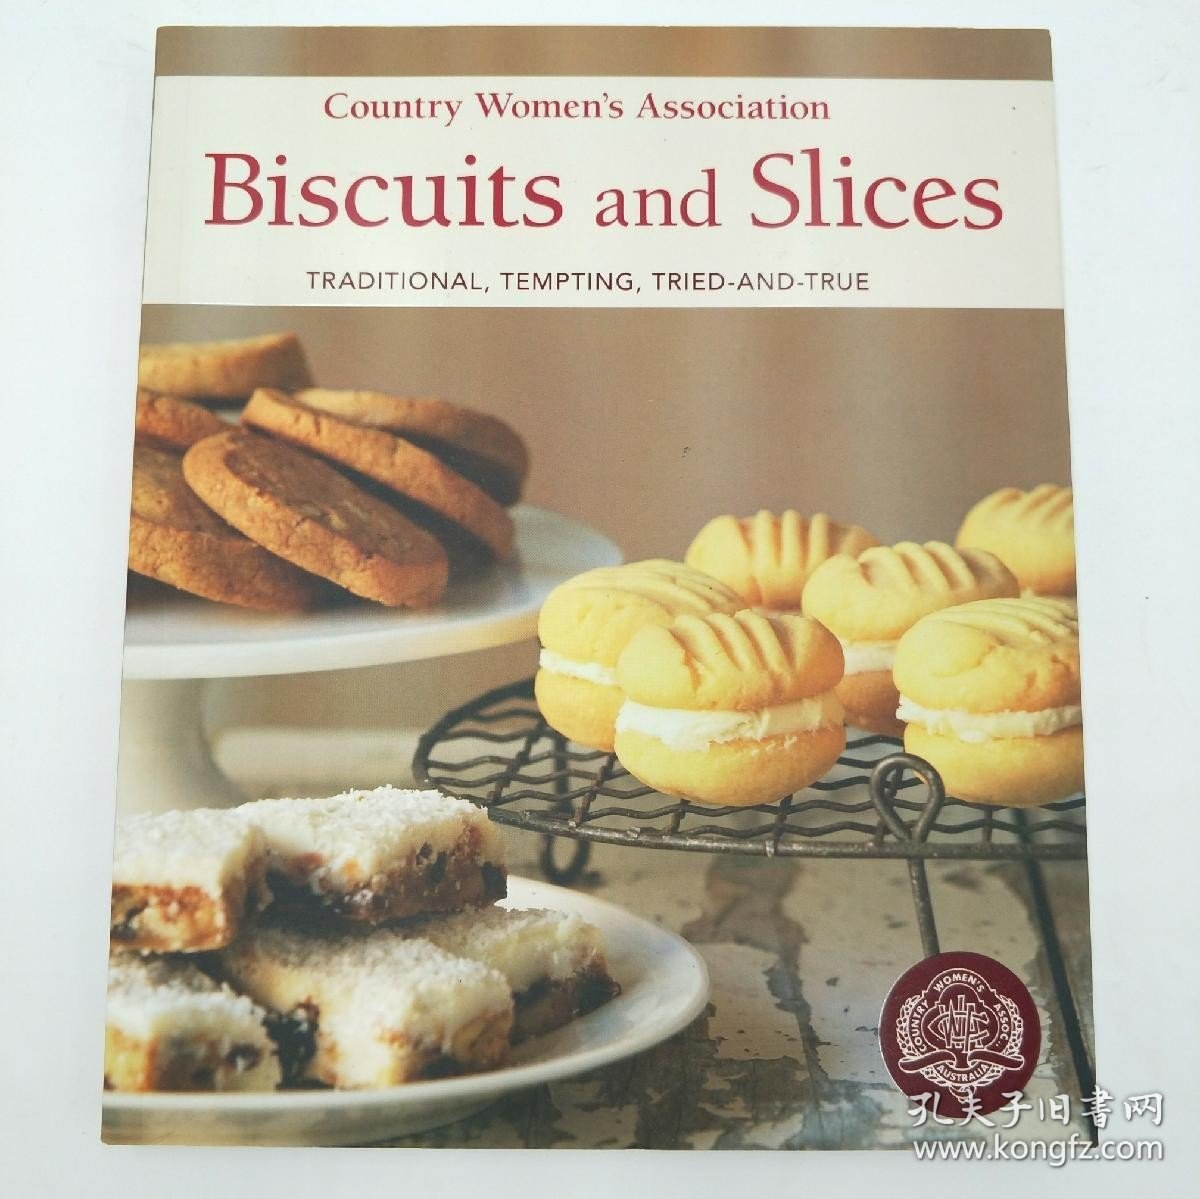 Biscuits And Slices. Country Women's Association